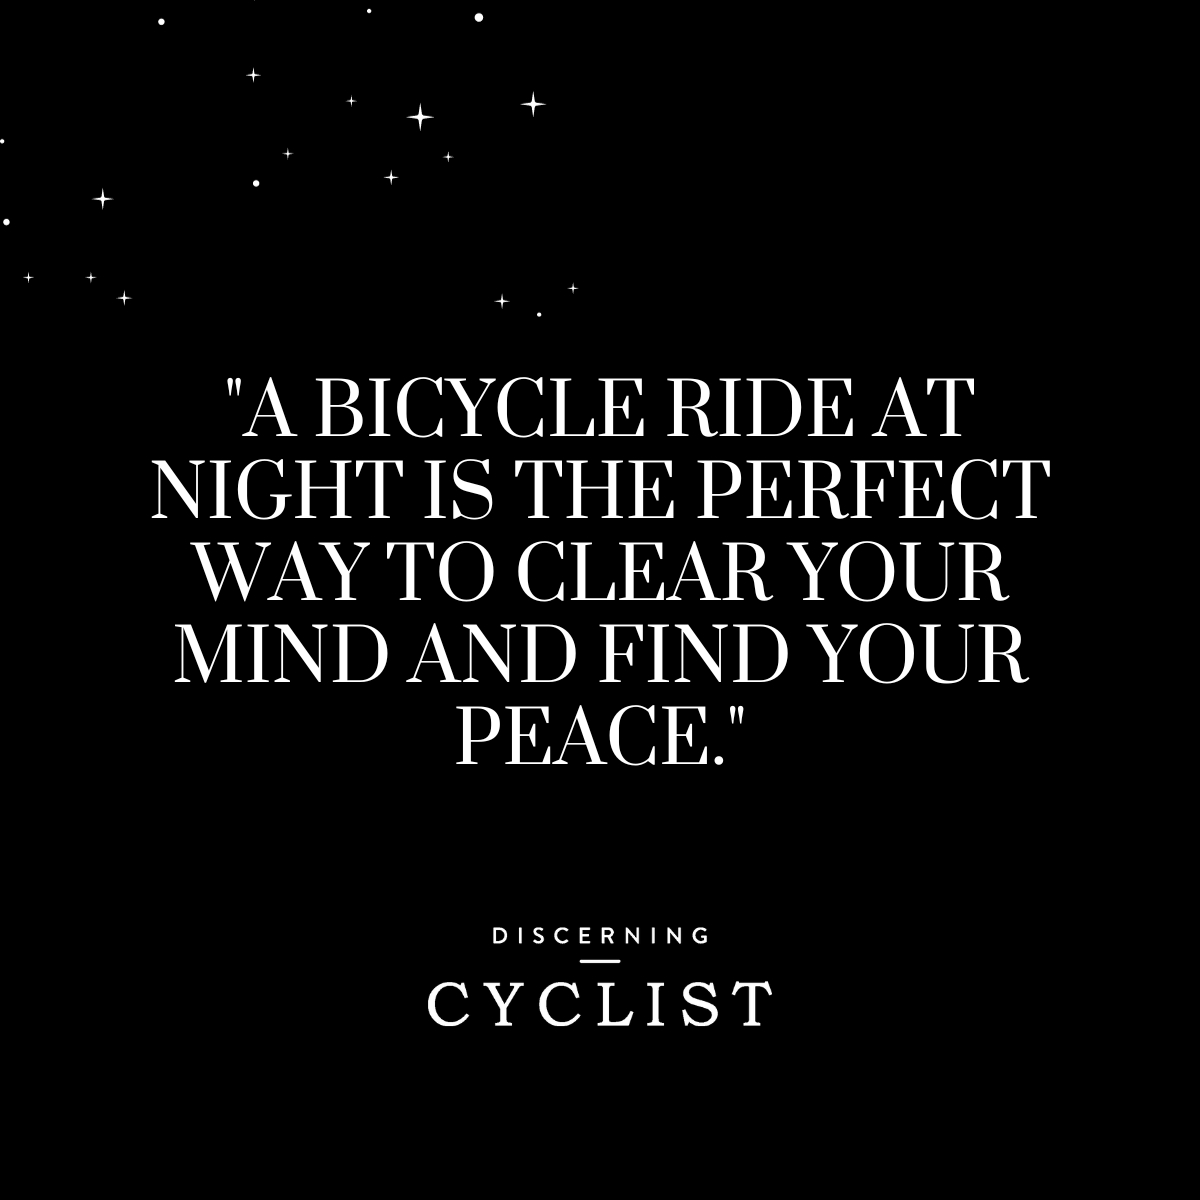 "A bicycle ride at night is the perfect way to clear your mind and find your peace."